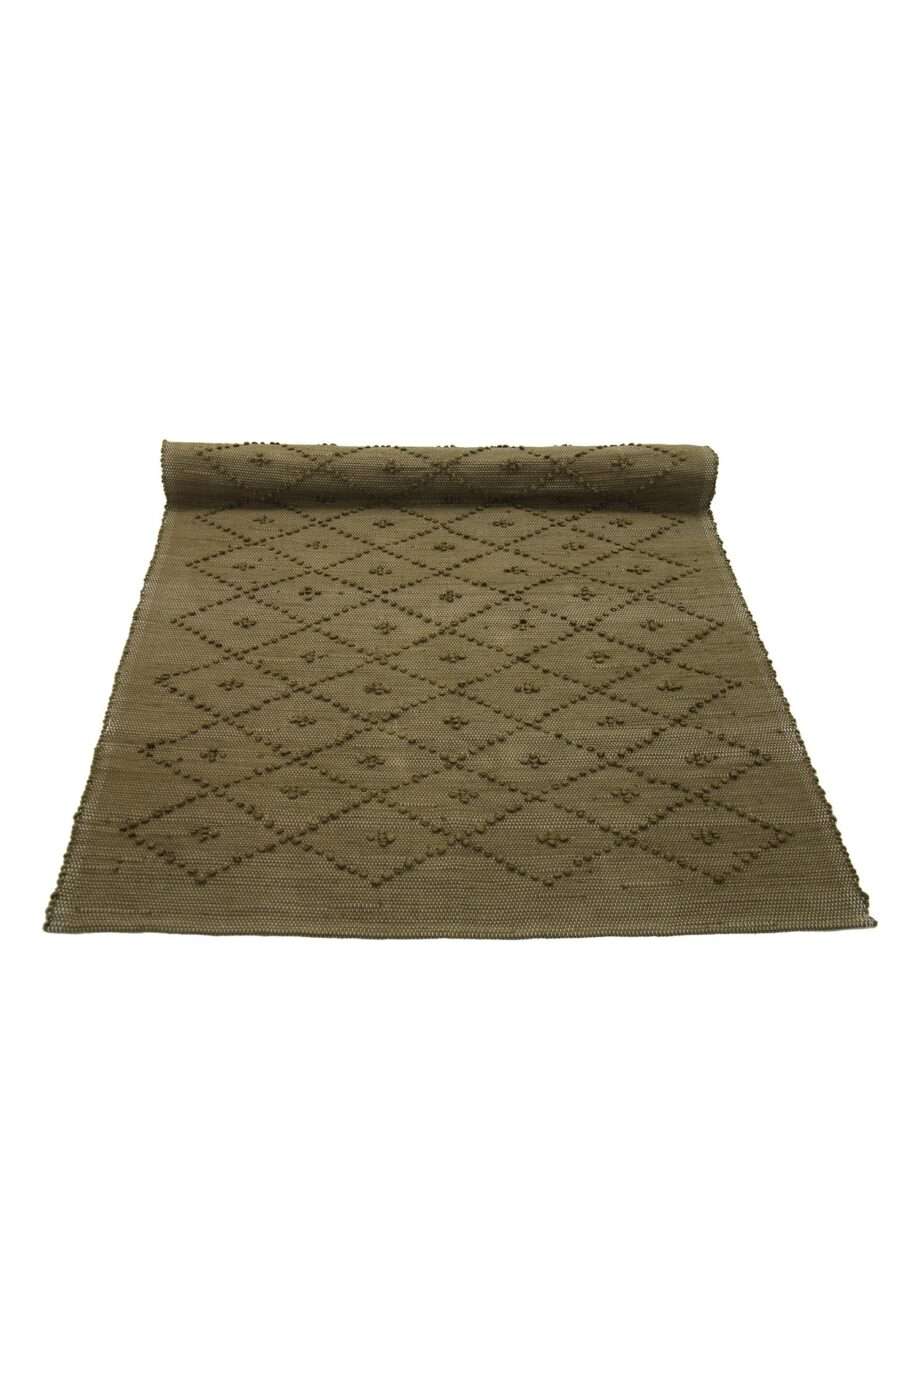 diamond olive green woven cotton rug large